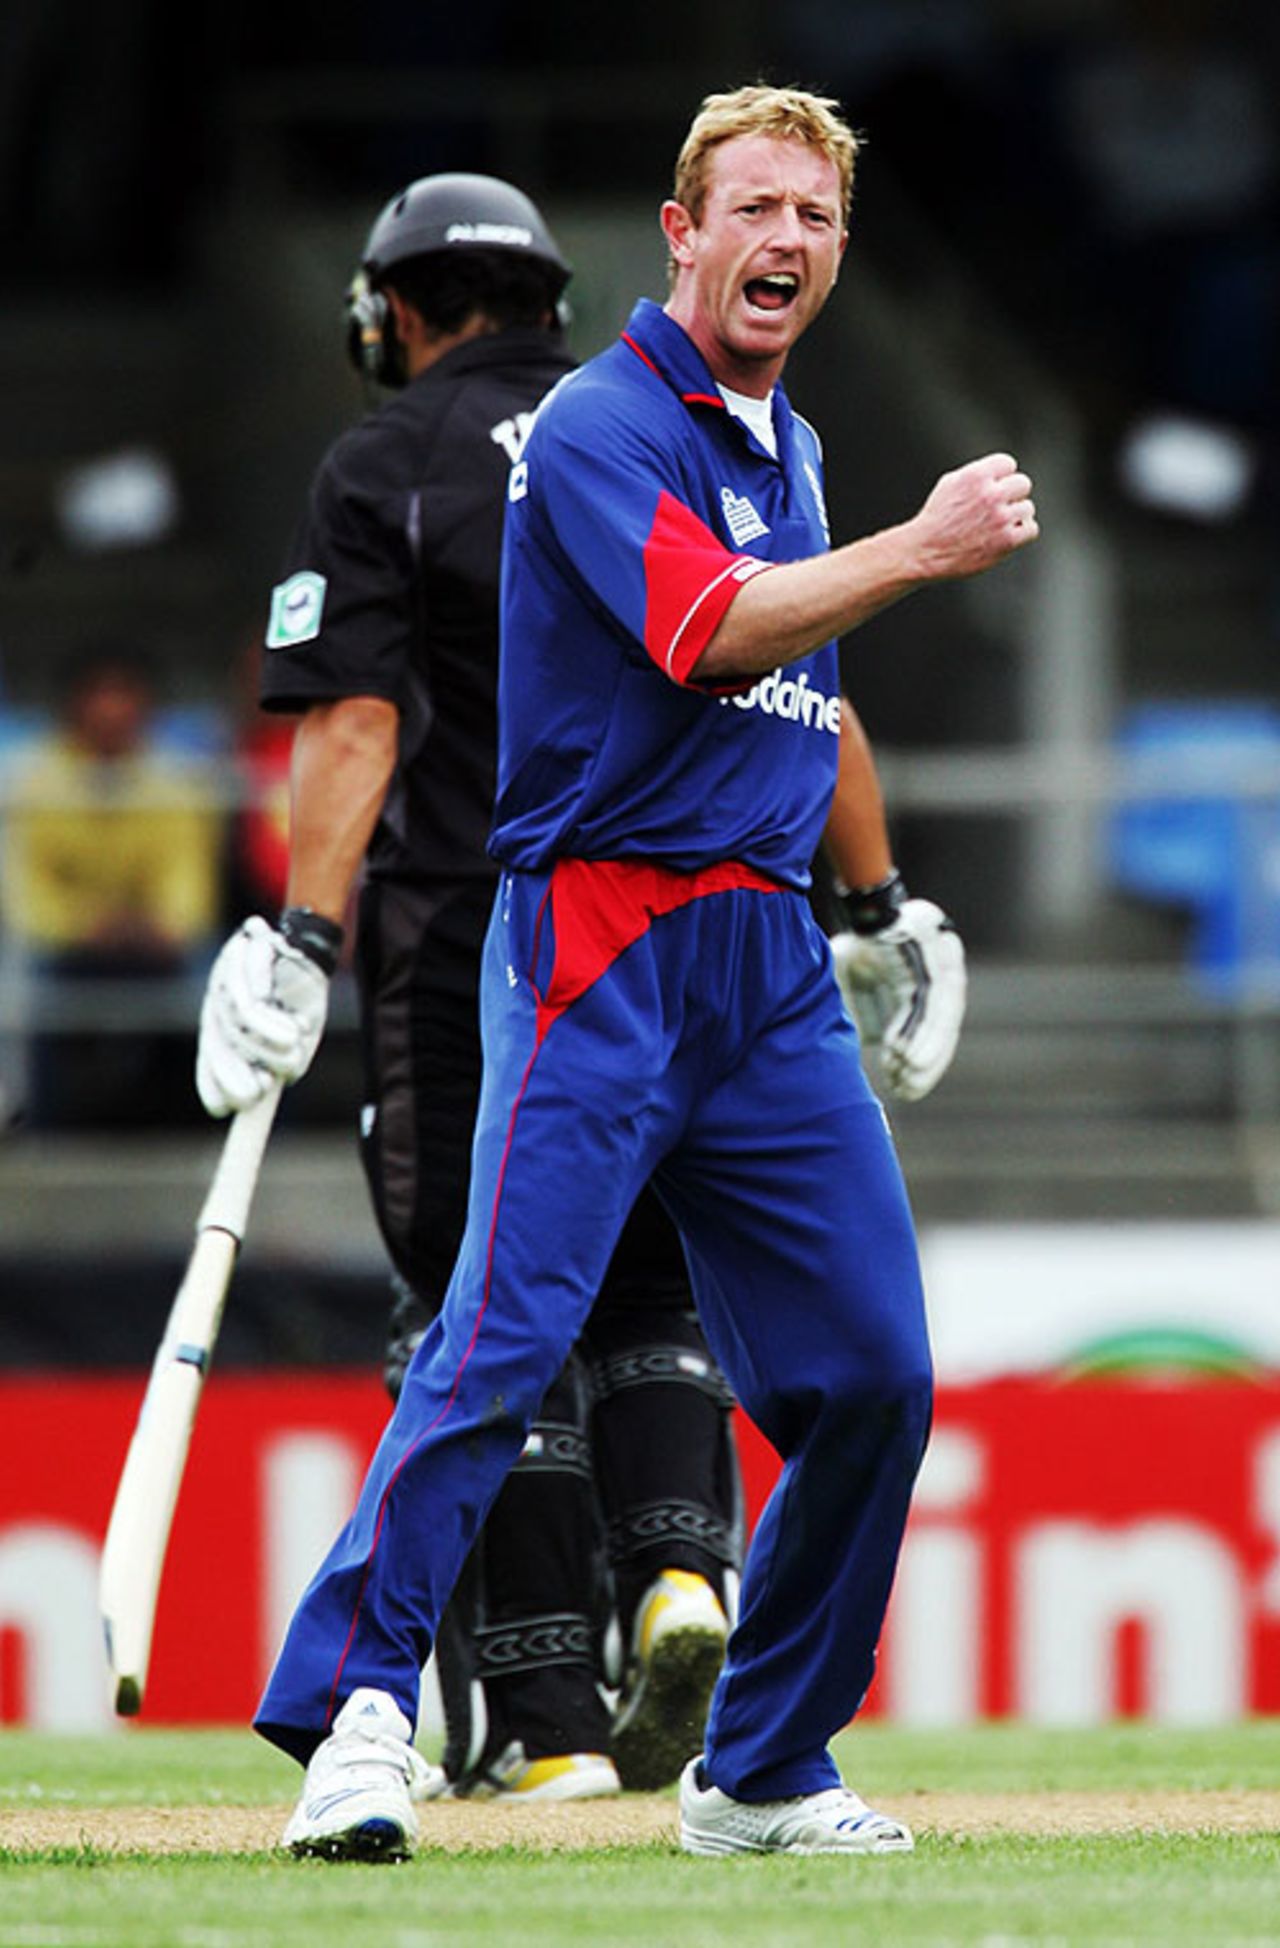 Paul Collingwood claimed three wickets, including Peter Fulton for 4, New Zealand v England, 3rd ODI, Auckland, February 15, 2008